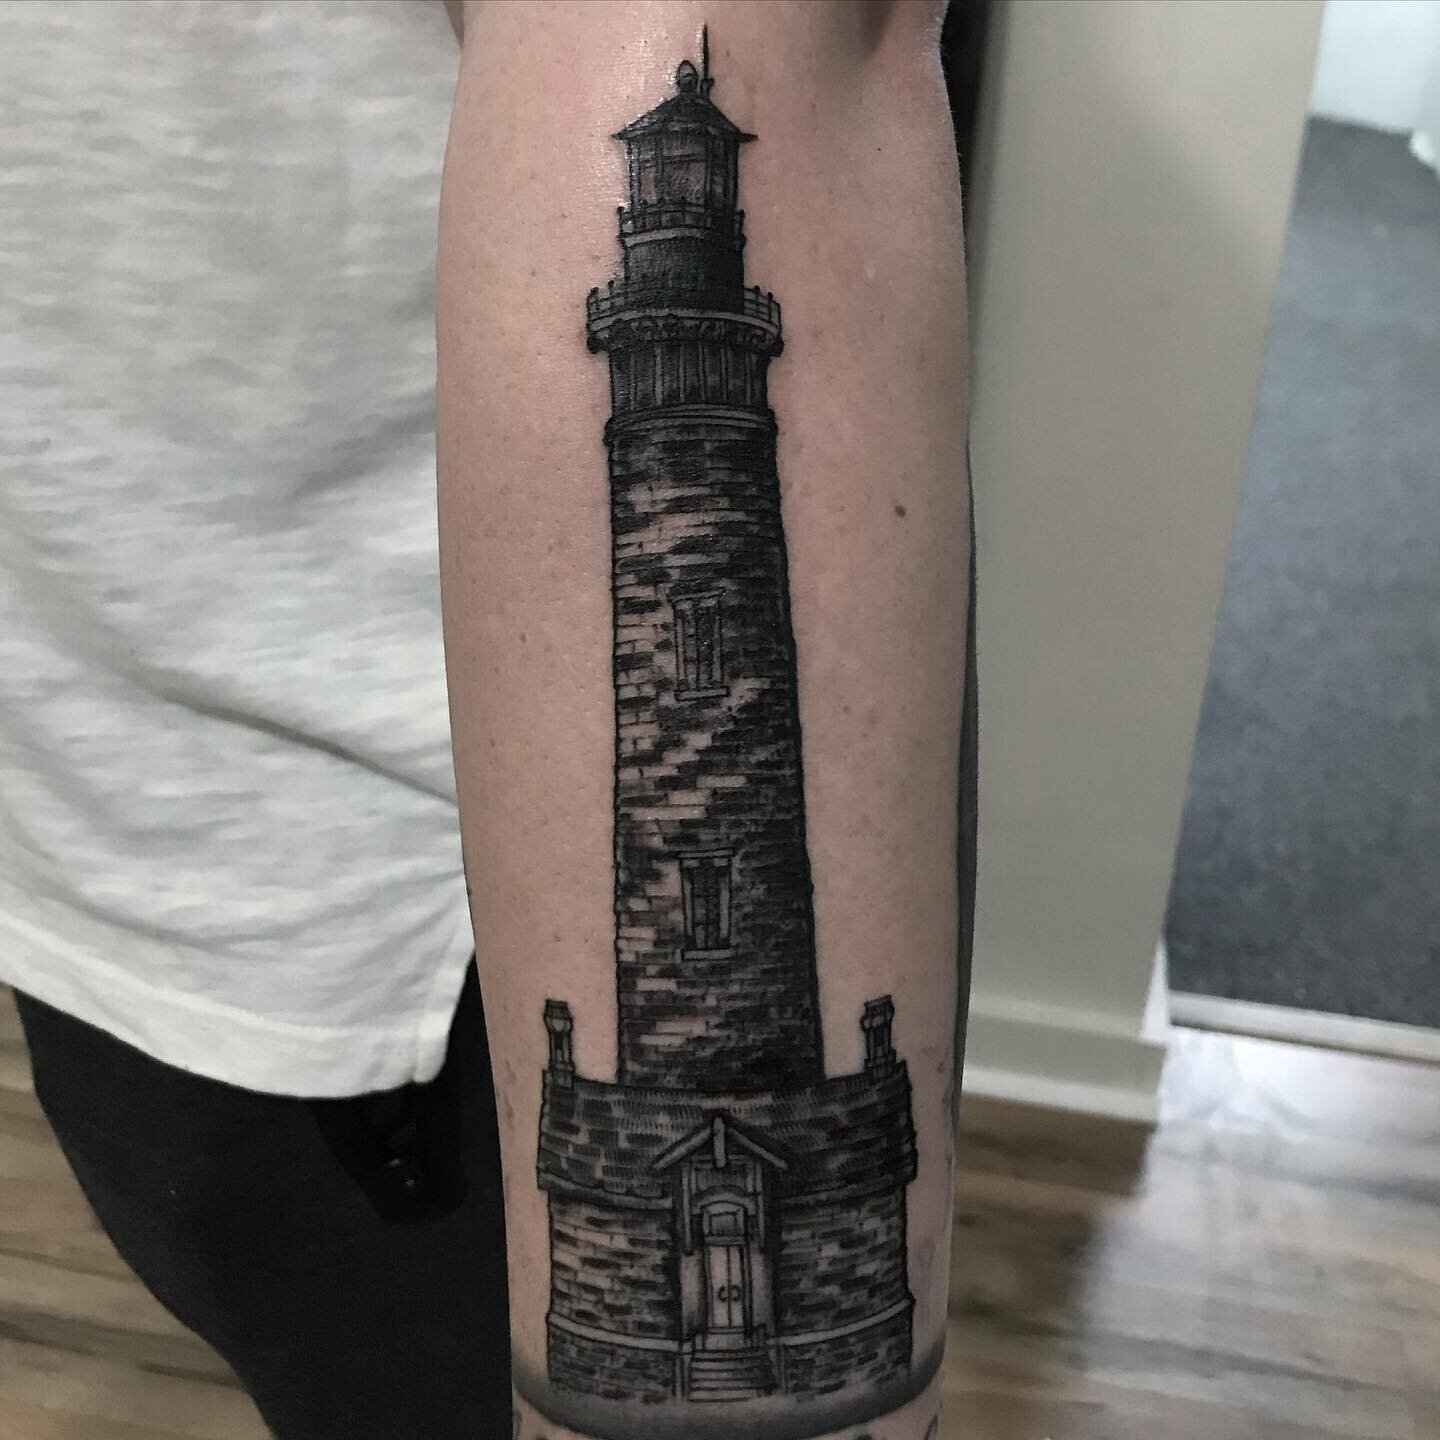 @jamesrobertstattooist slaying this lighthouse! Thank you everyone for your continued support! Both @jamesrobertstattooist and @kaitlynteressa are so humbled to have such a great community and clientele!